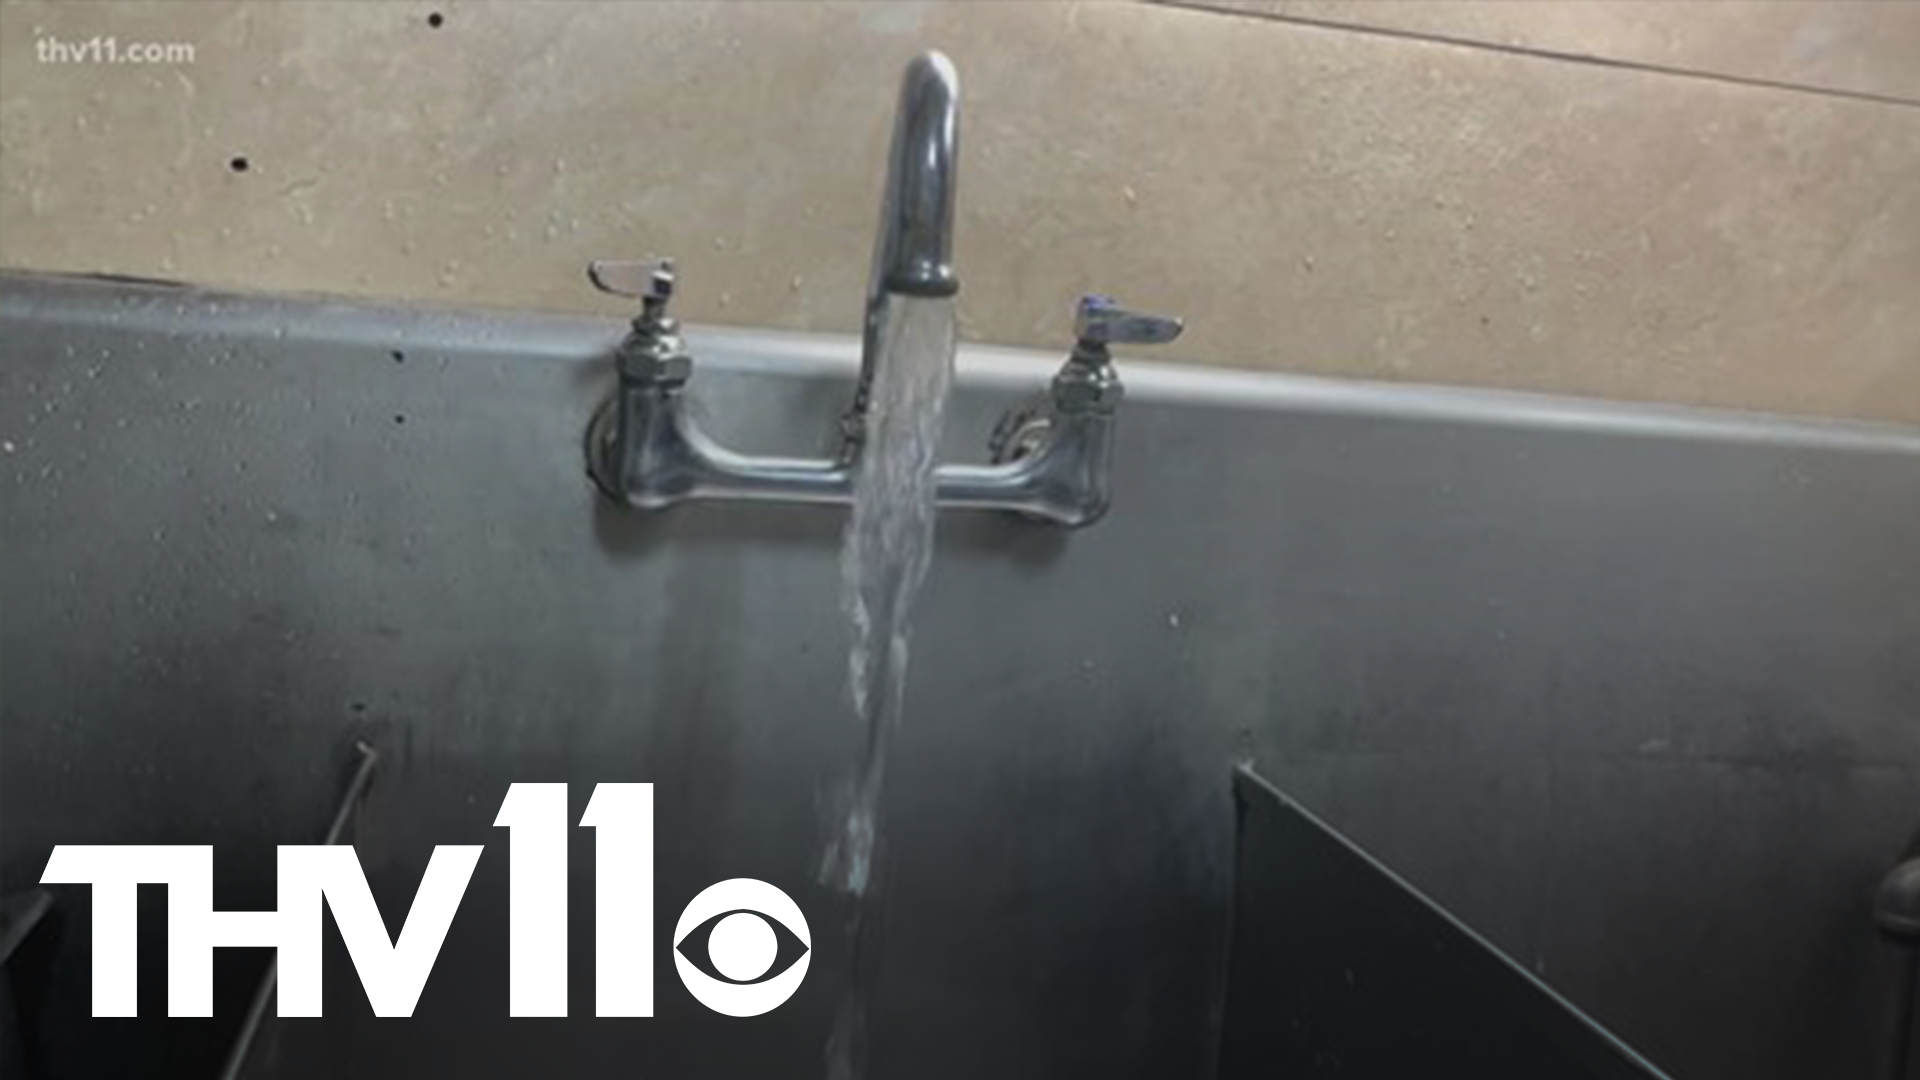 Pine Bluff is still reeling with a water crisis. Some businesses say the water pressure has improved, but it's far from over.